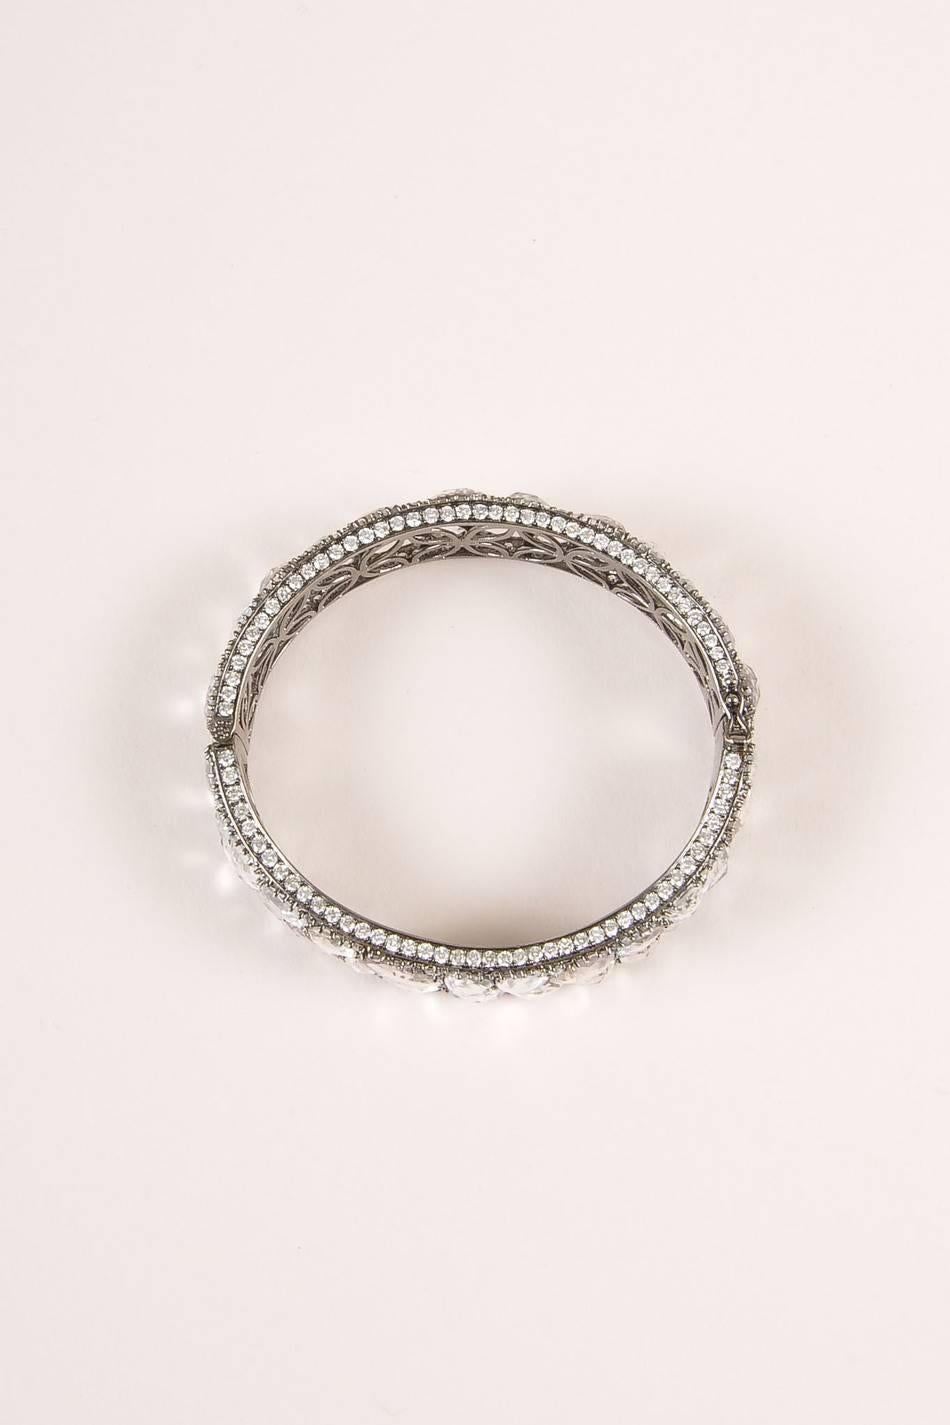 Gorgeous multi-faceted, chunky white sapphire gemstone-encrusted bracelet. Pave diamond border and scattered throughout gemstones are set in 18 karat white gold frame. Hinged opening with box clasp closure and two safety mini prong clasps.Interior